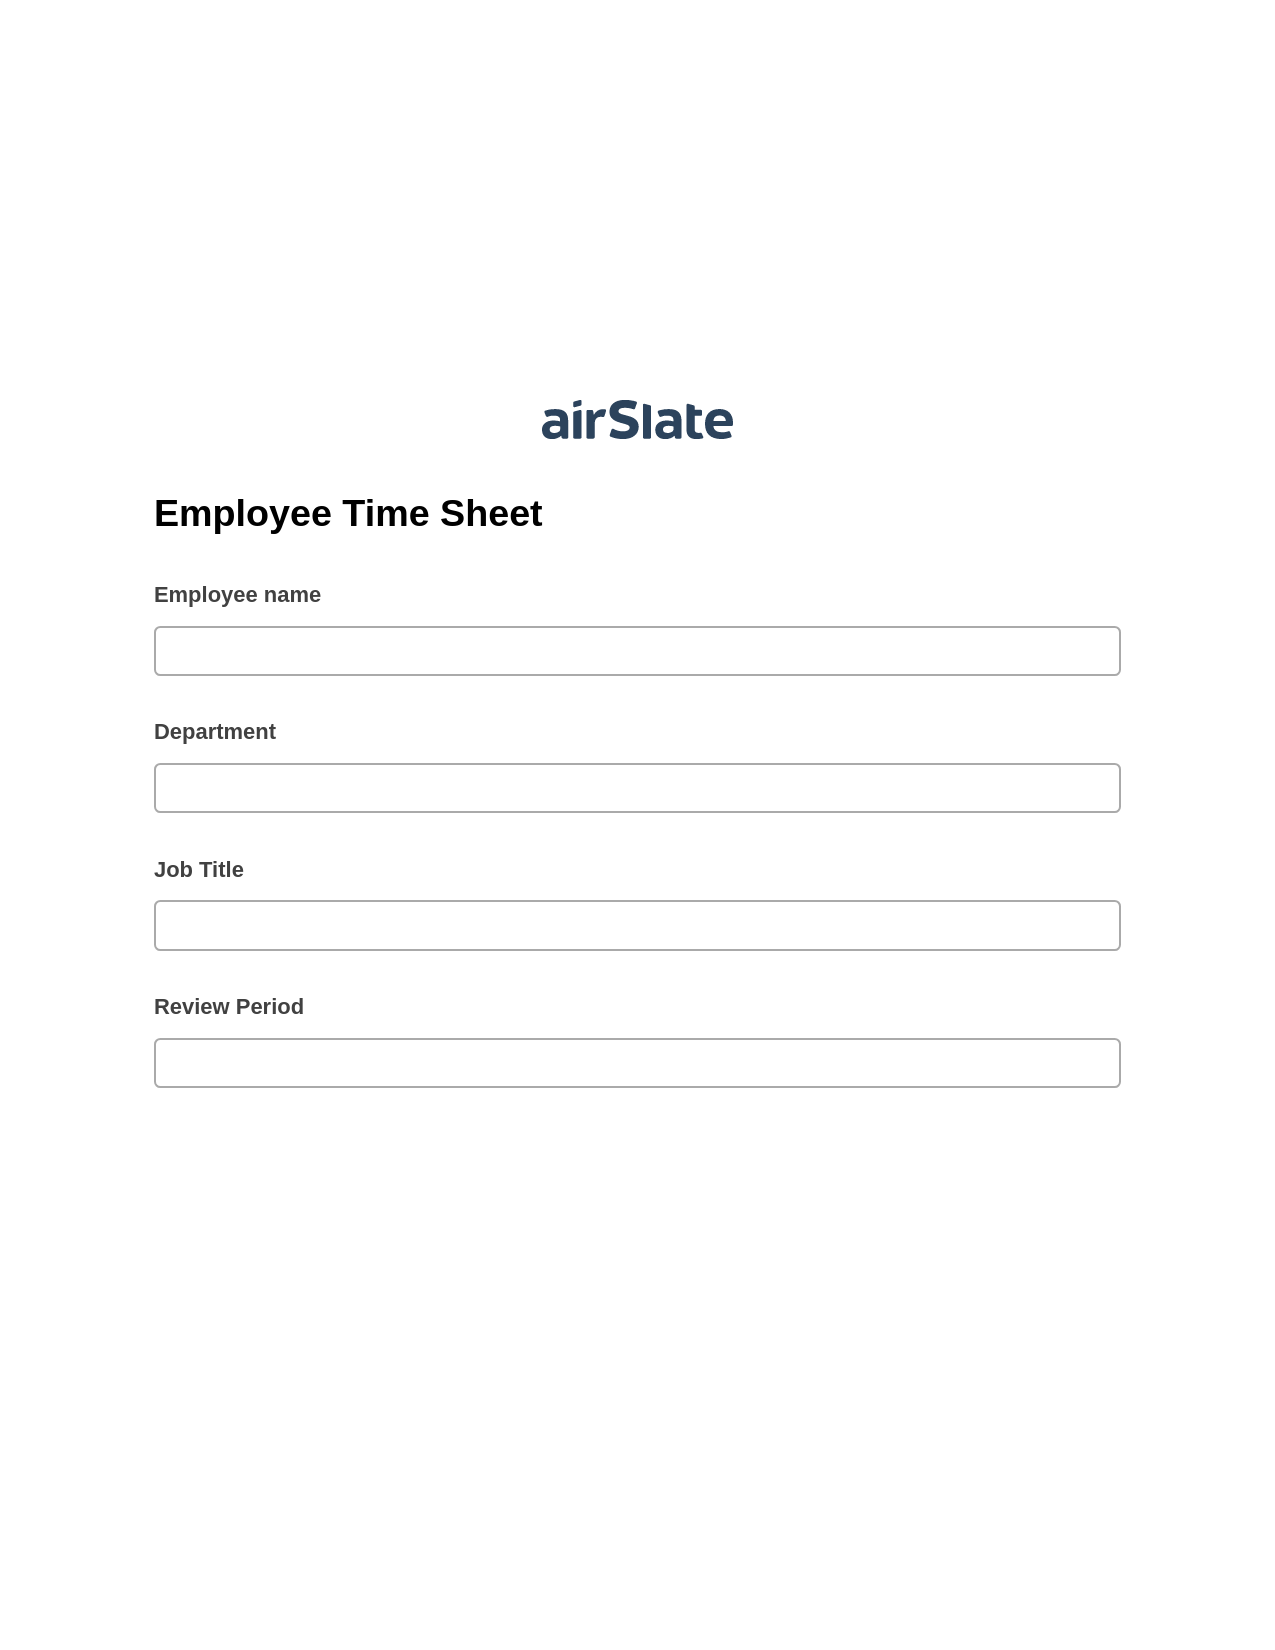 Multirole Employee Time Sheet Pre-fill from another Slate Bot, Create Slate Reminder Bot, Export to Smartsheet